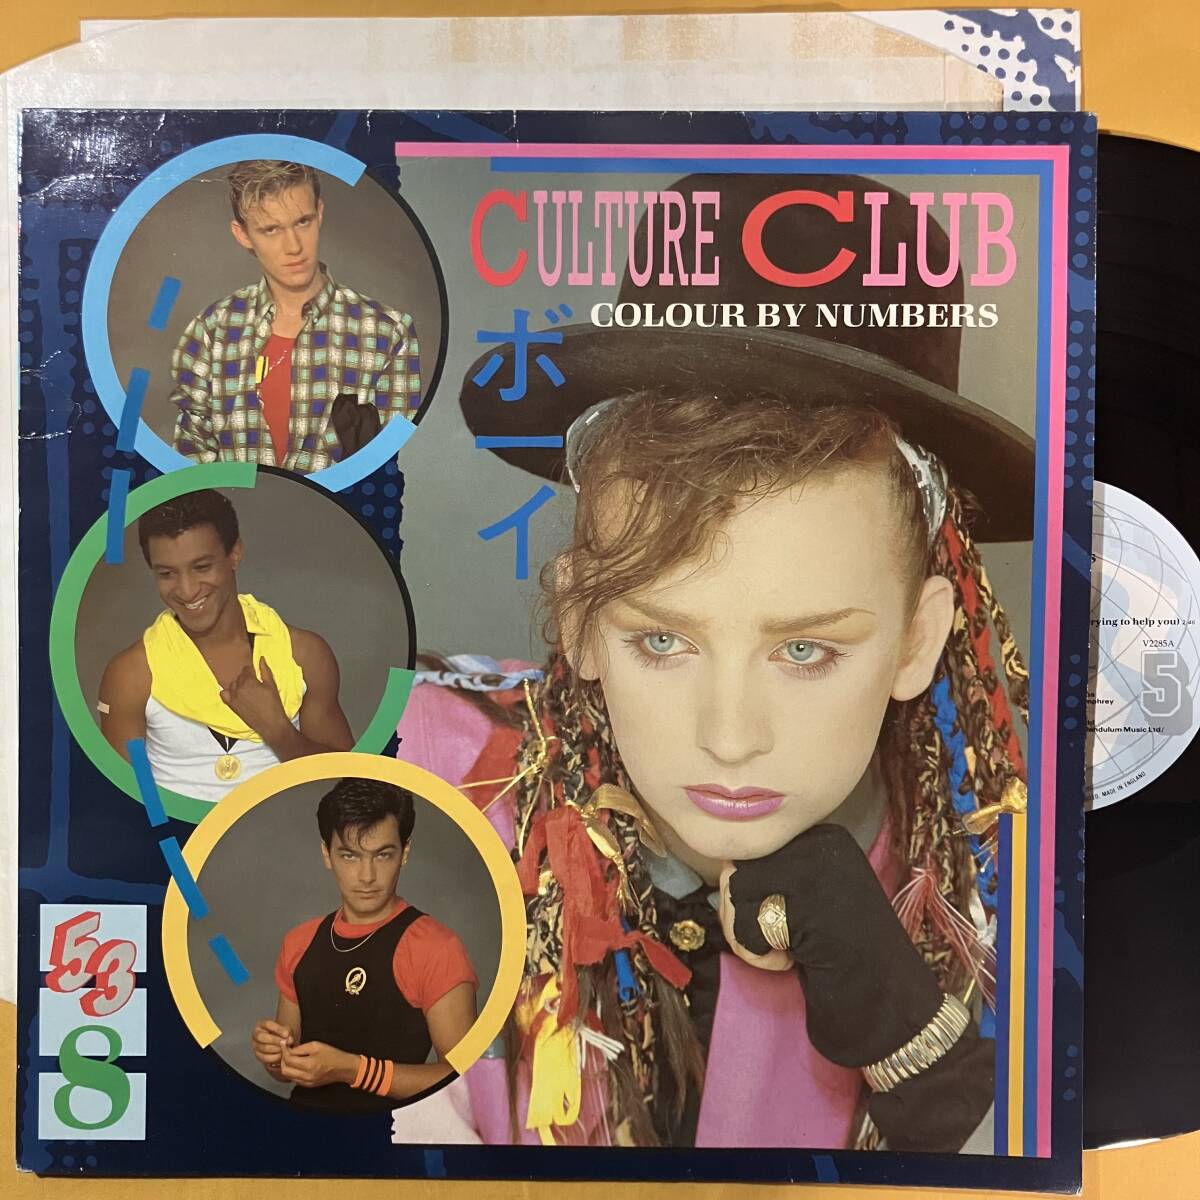 【SALE】02H UK盤 カルチャー・クラブ Culture Club / カラー・バイ・ナンバーズ Colour By Numbers V2285 LP レコード アナログ盤_画像1